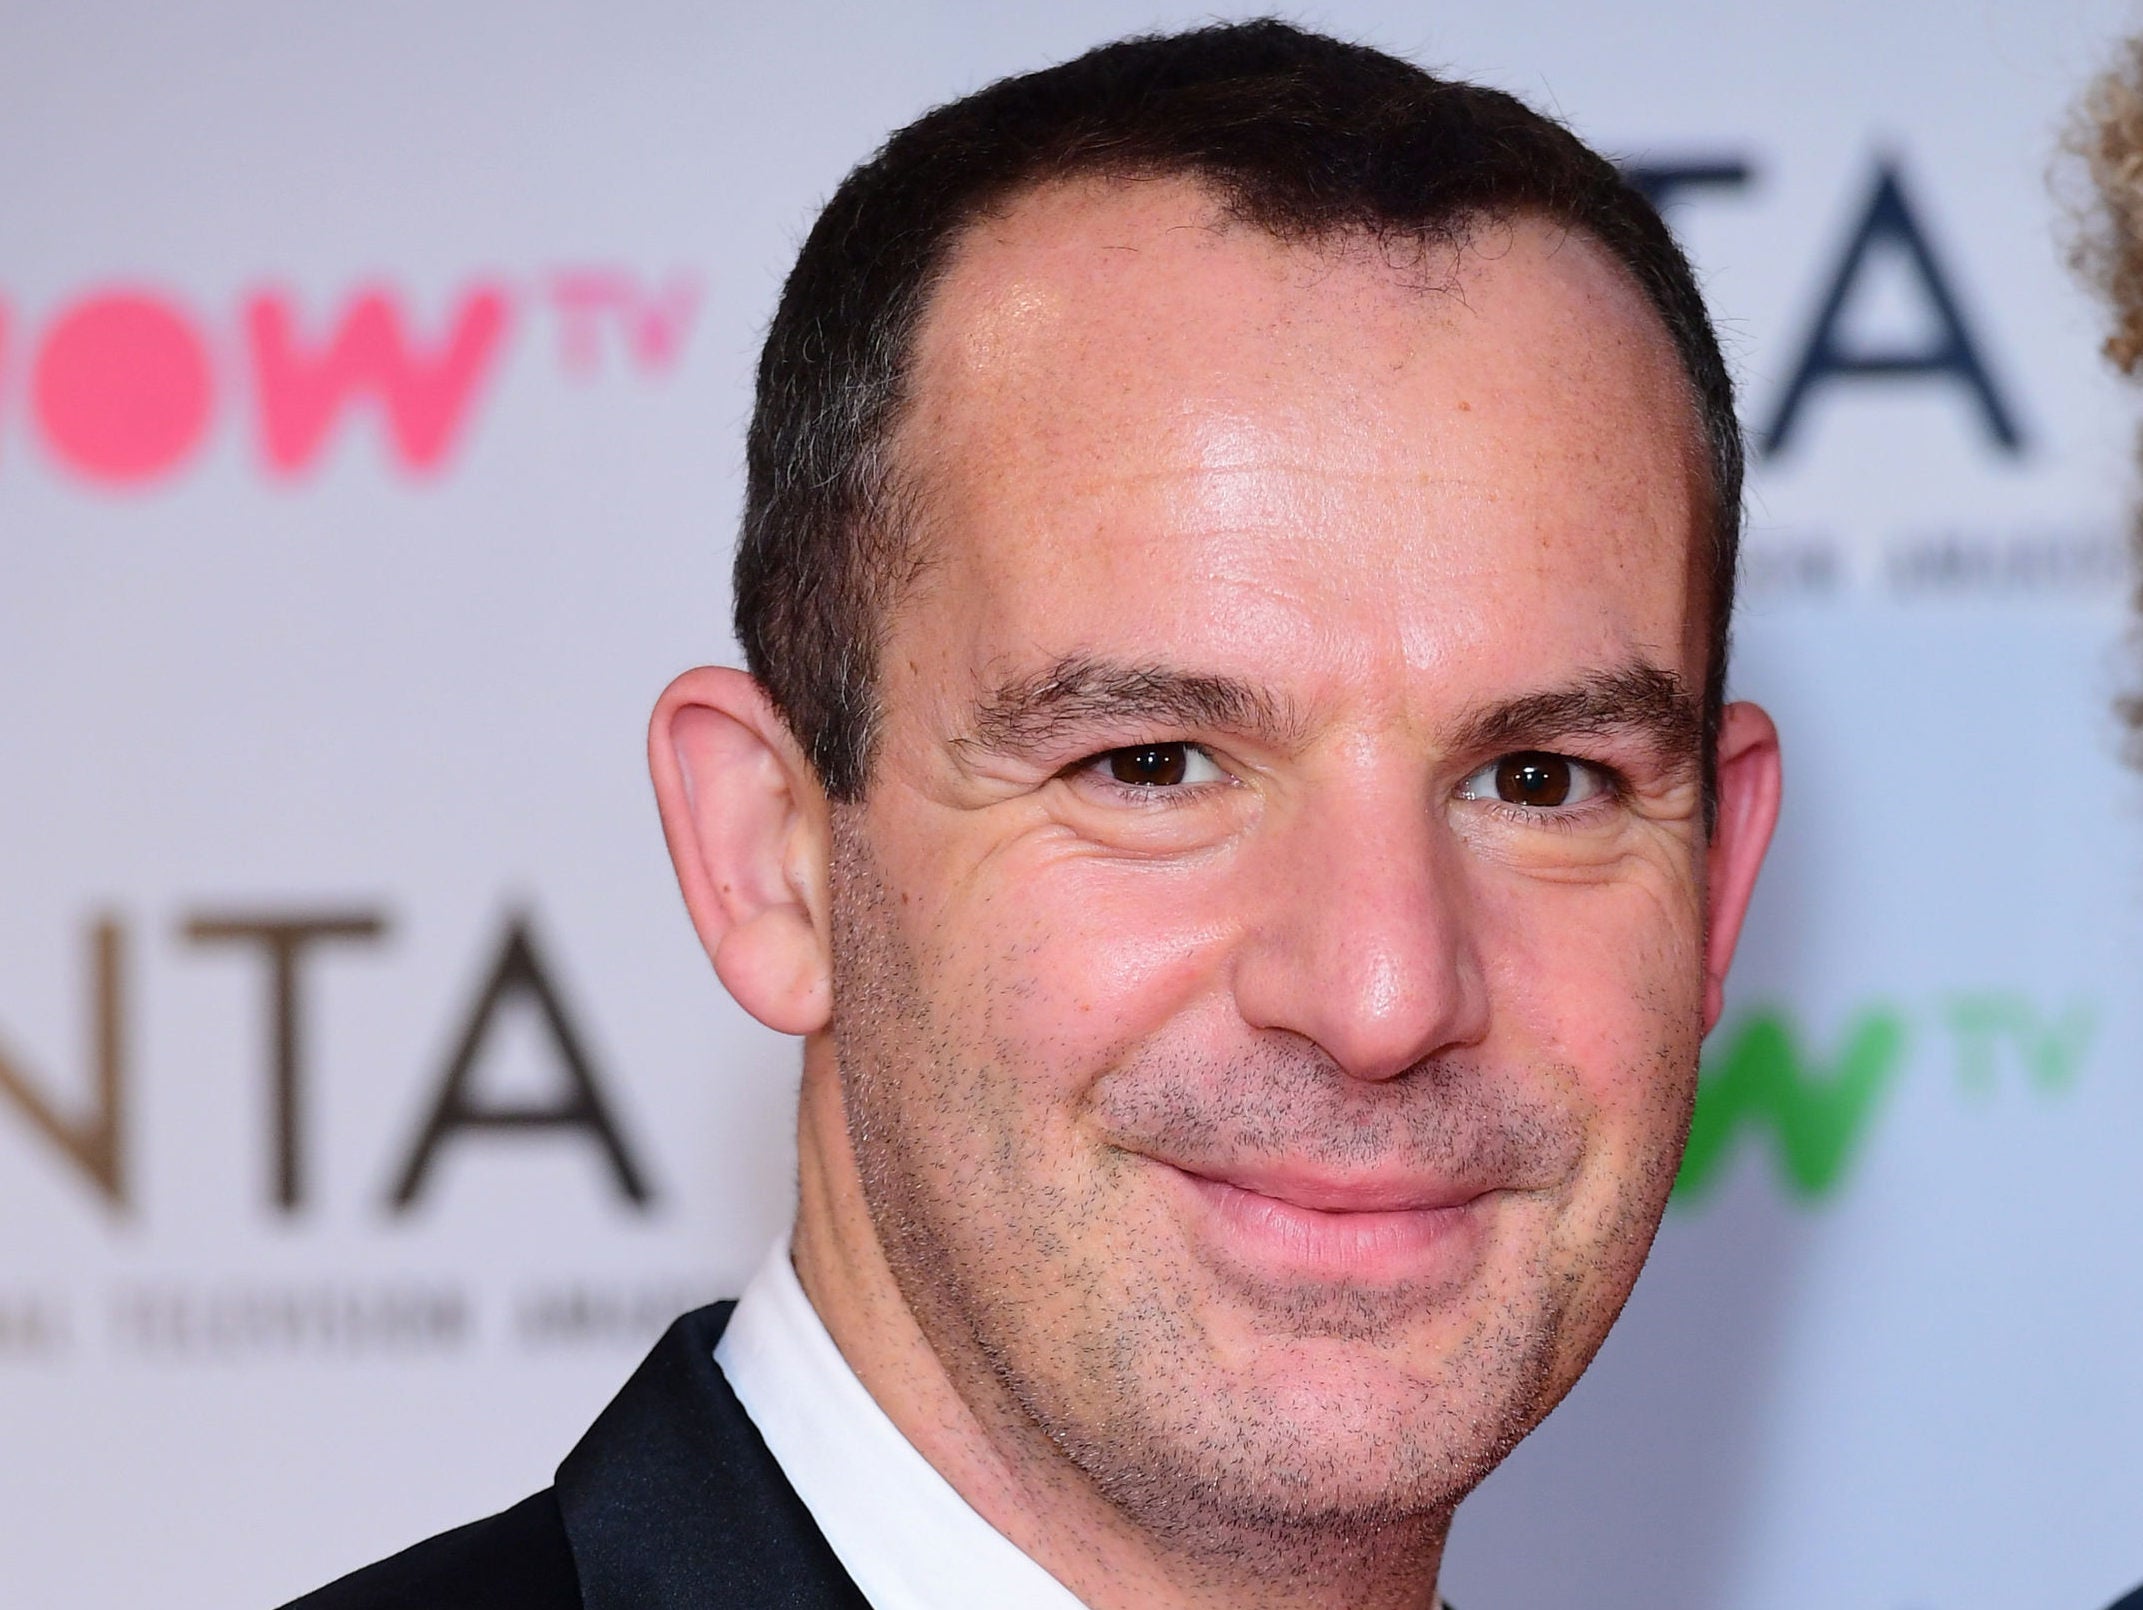 Money journalist Martin Lewis says ball in Facebook's court after meeting with web giant over scam ads lawsuit